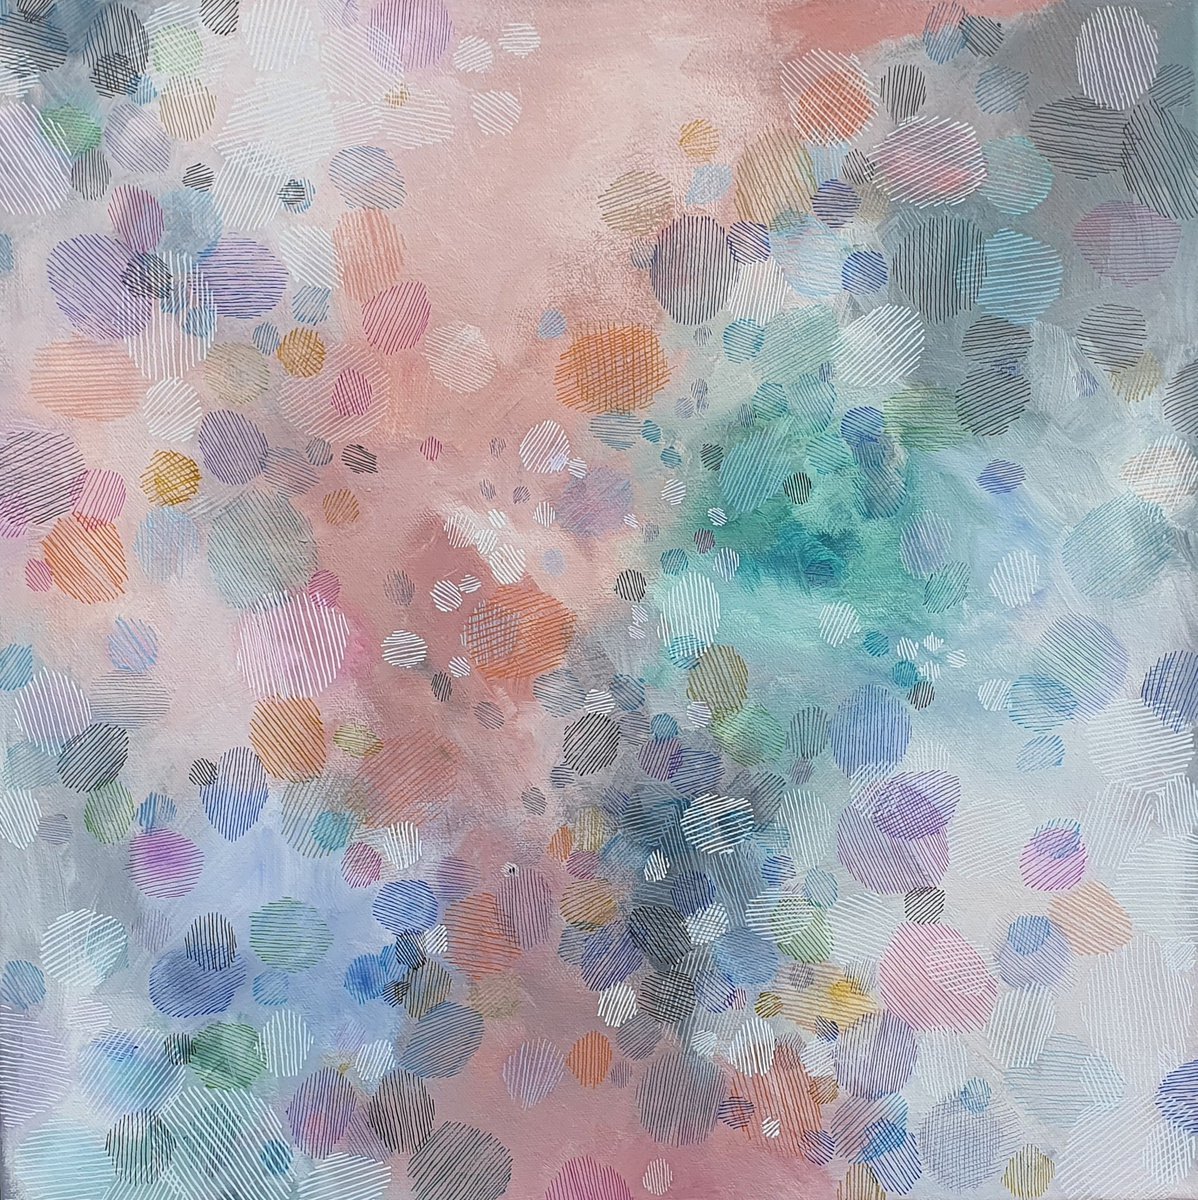 Floral Collection, Pastel Shades 2 by Holly Foster